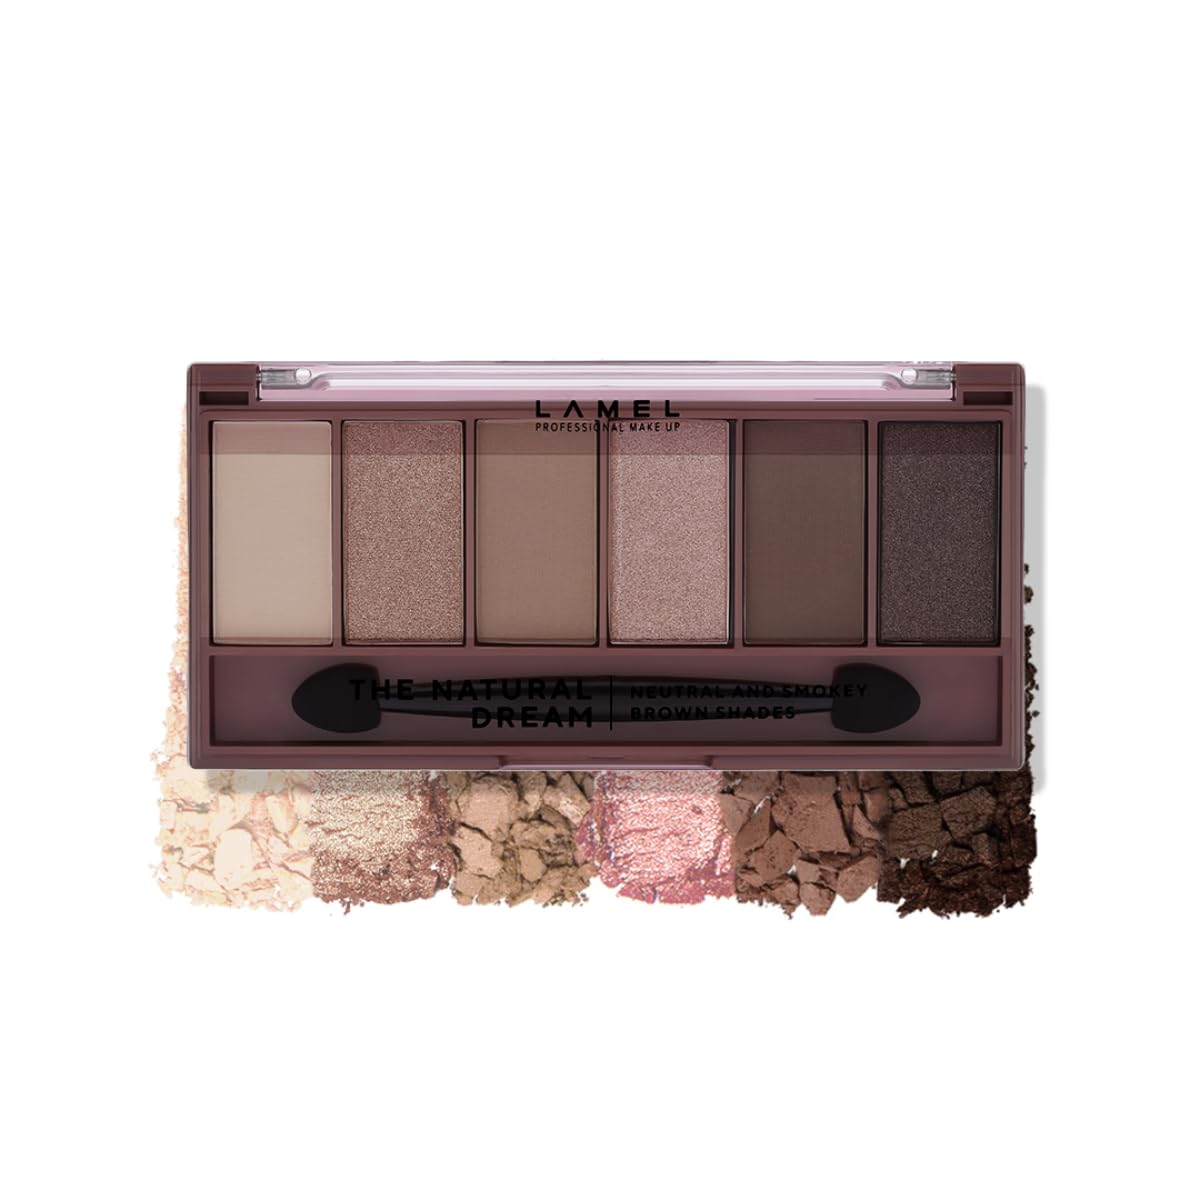 Lamel- The Natural Dream Eyeshadow Palette 403-Smoky Nude |Six versatile shades |Neutral tones & dazzling shimmers |Easily blendable |Crease-free formula |10.2gm